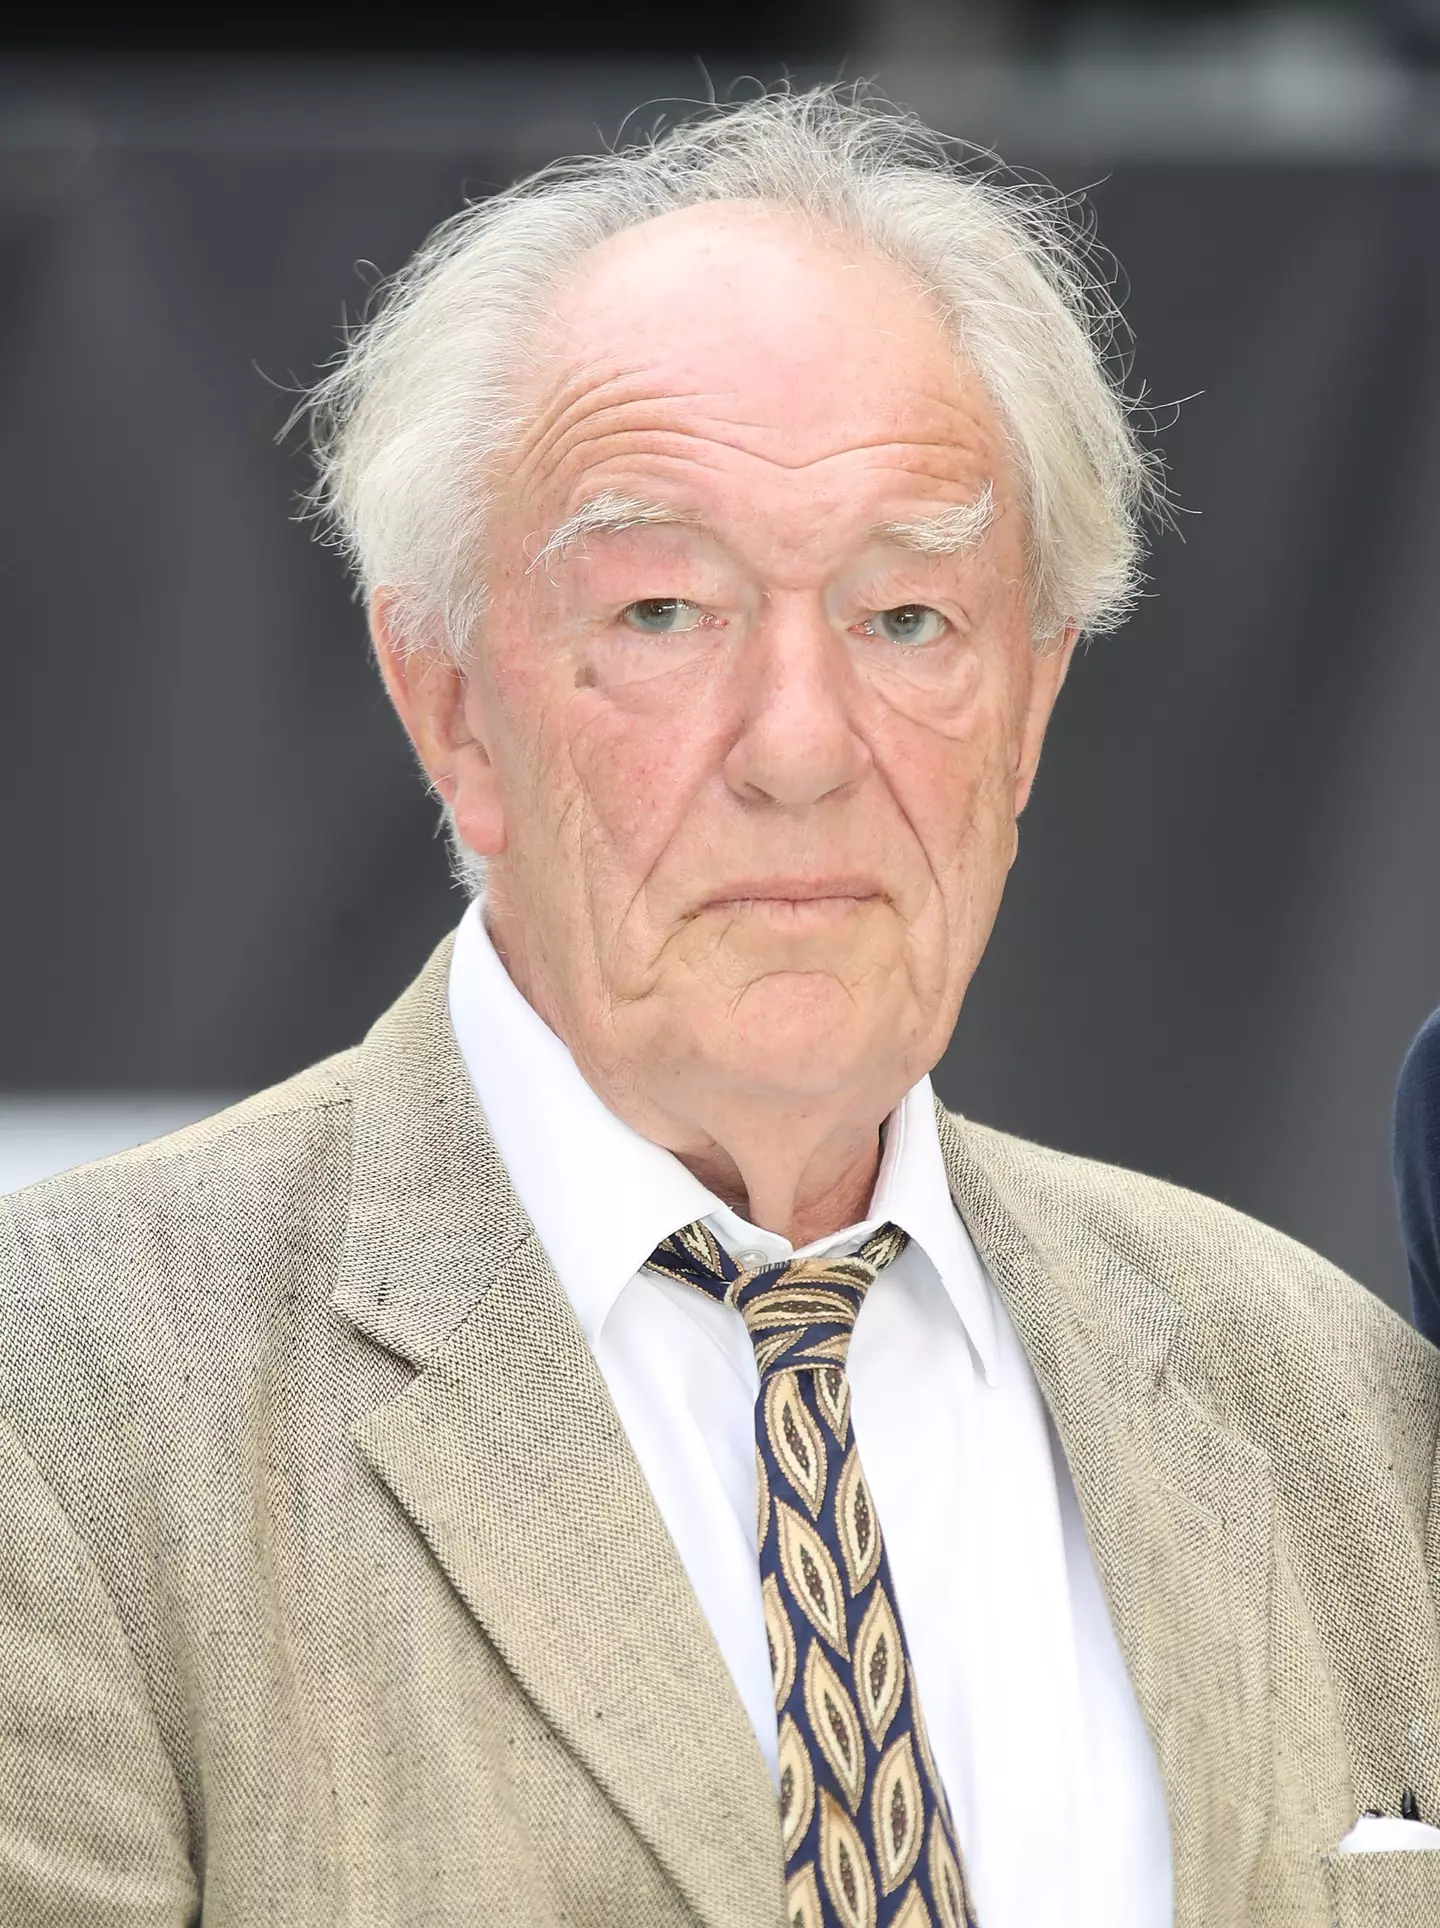 Sir Michael Gambon has died at the age of 82.